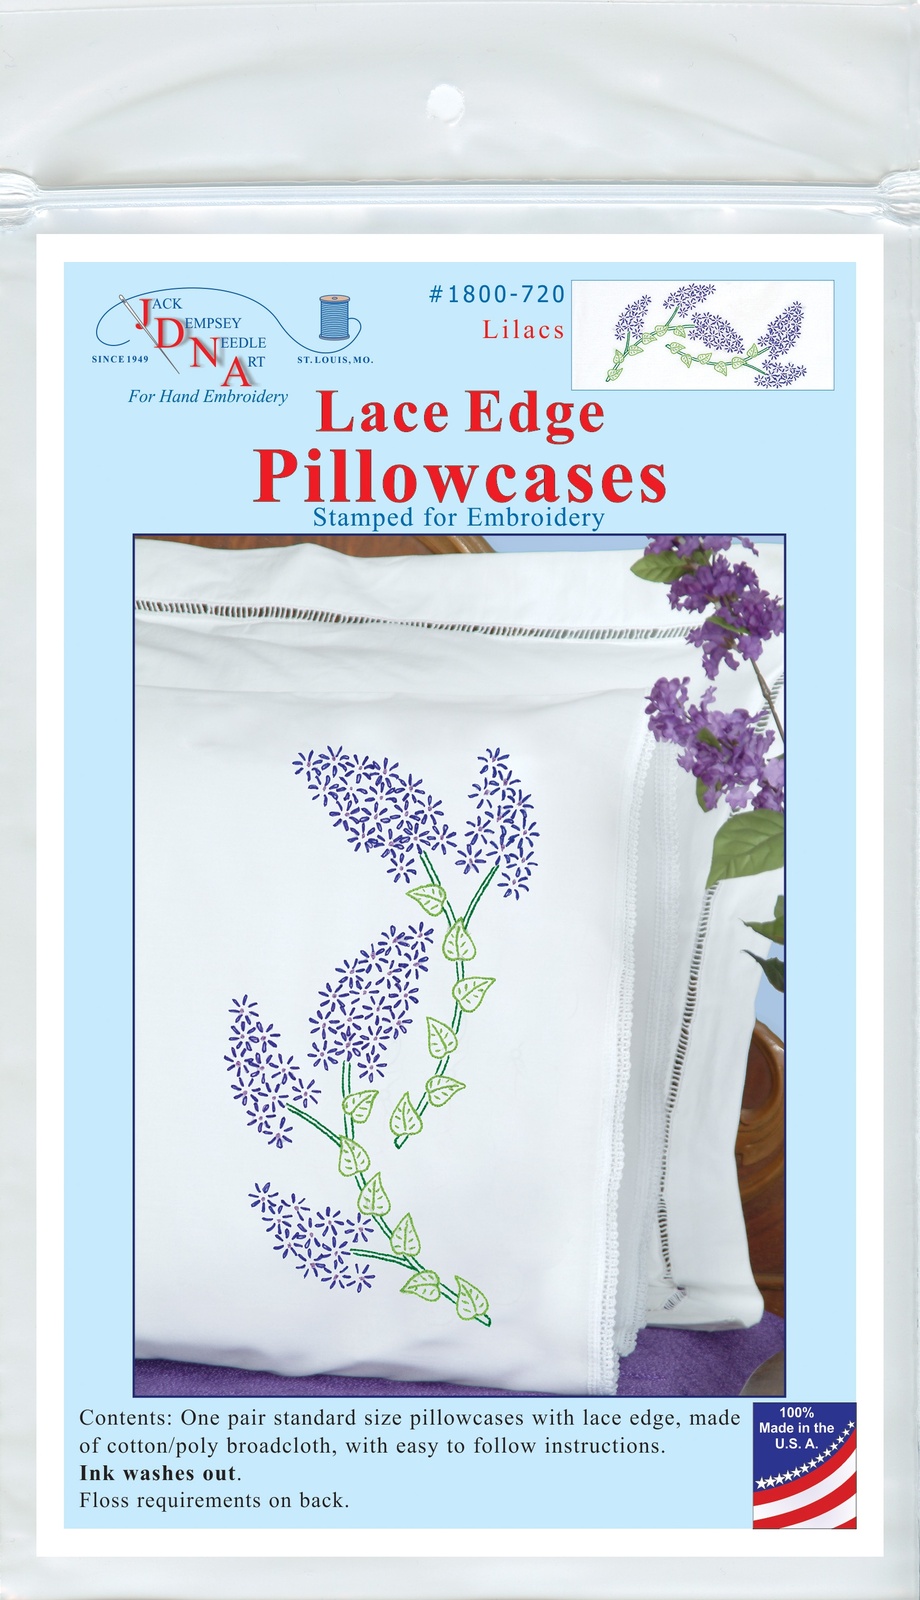 Primary image for Jack Dempsey Stamped Pillowcases W/White Lace Edge 2/Pkg-Lilacs